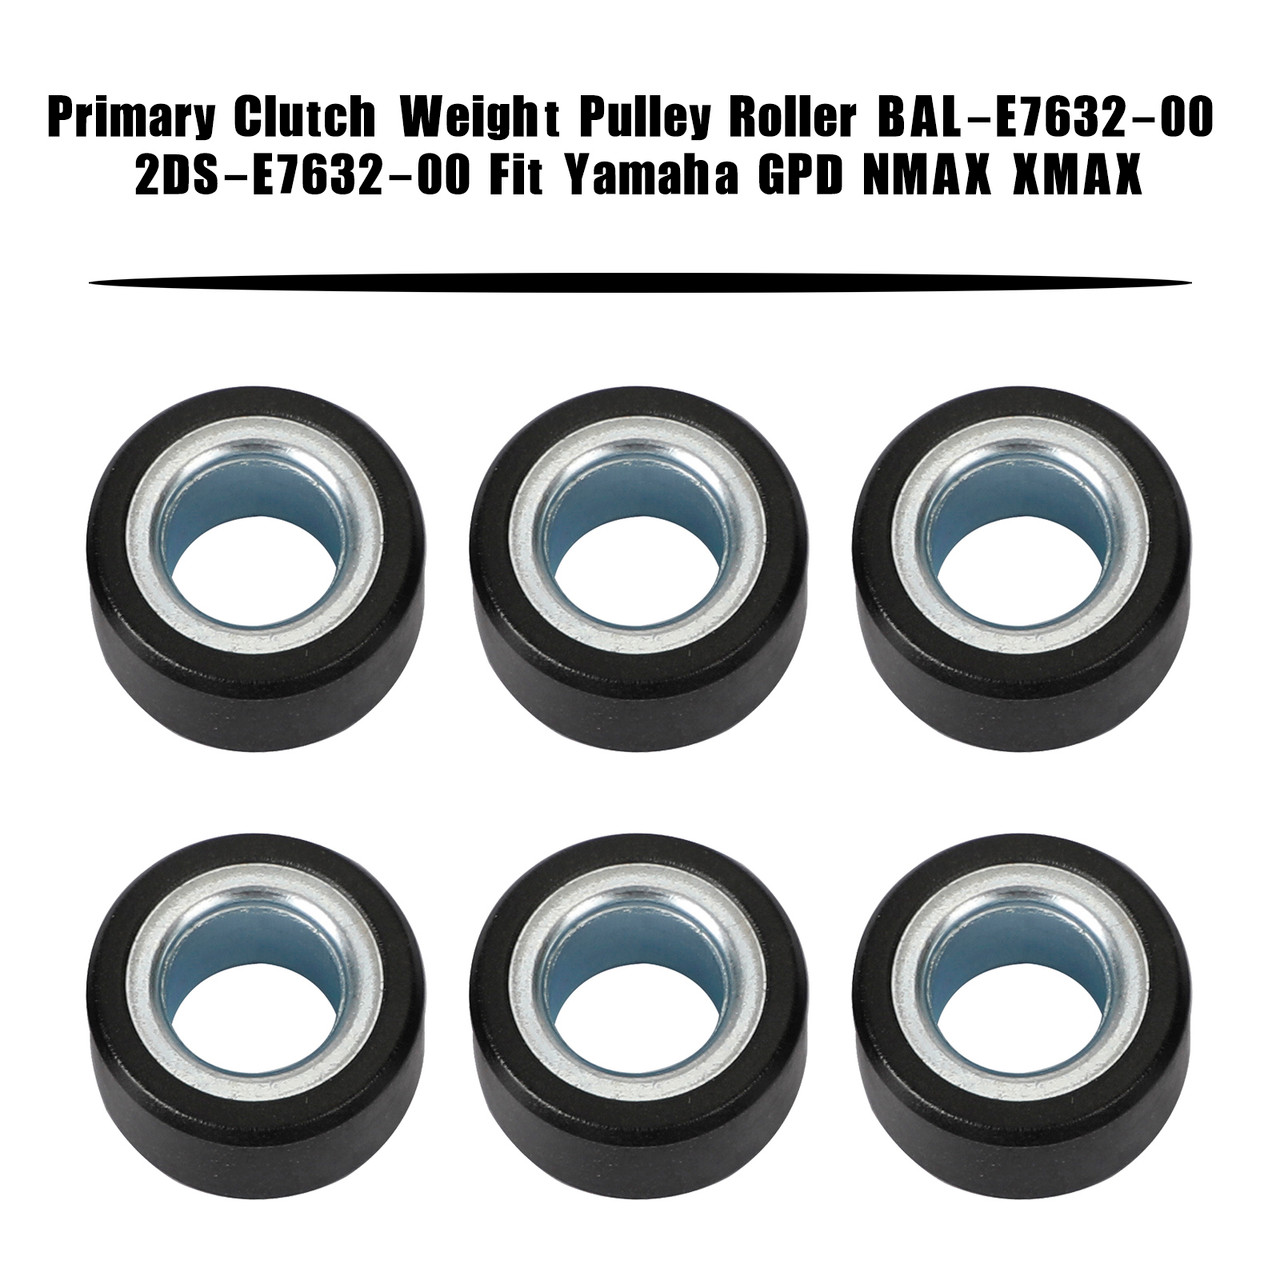 Primary Clutch Weight Pulley Roller For Yamaha GPD125-A NMAX125 YP125RA XMAX125